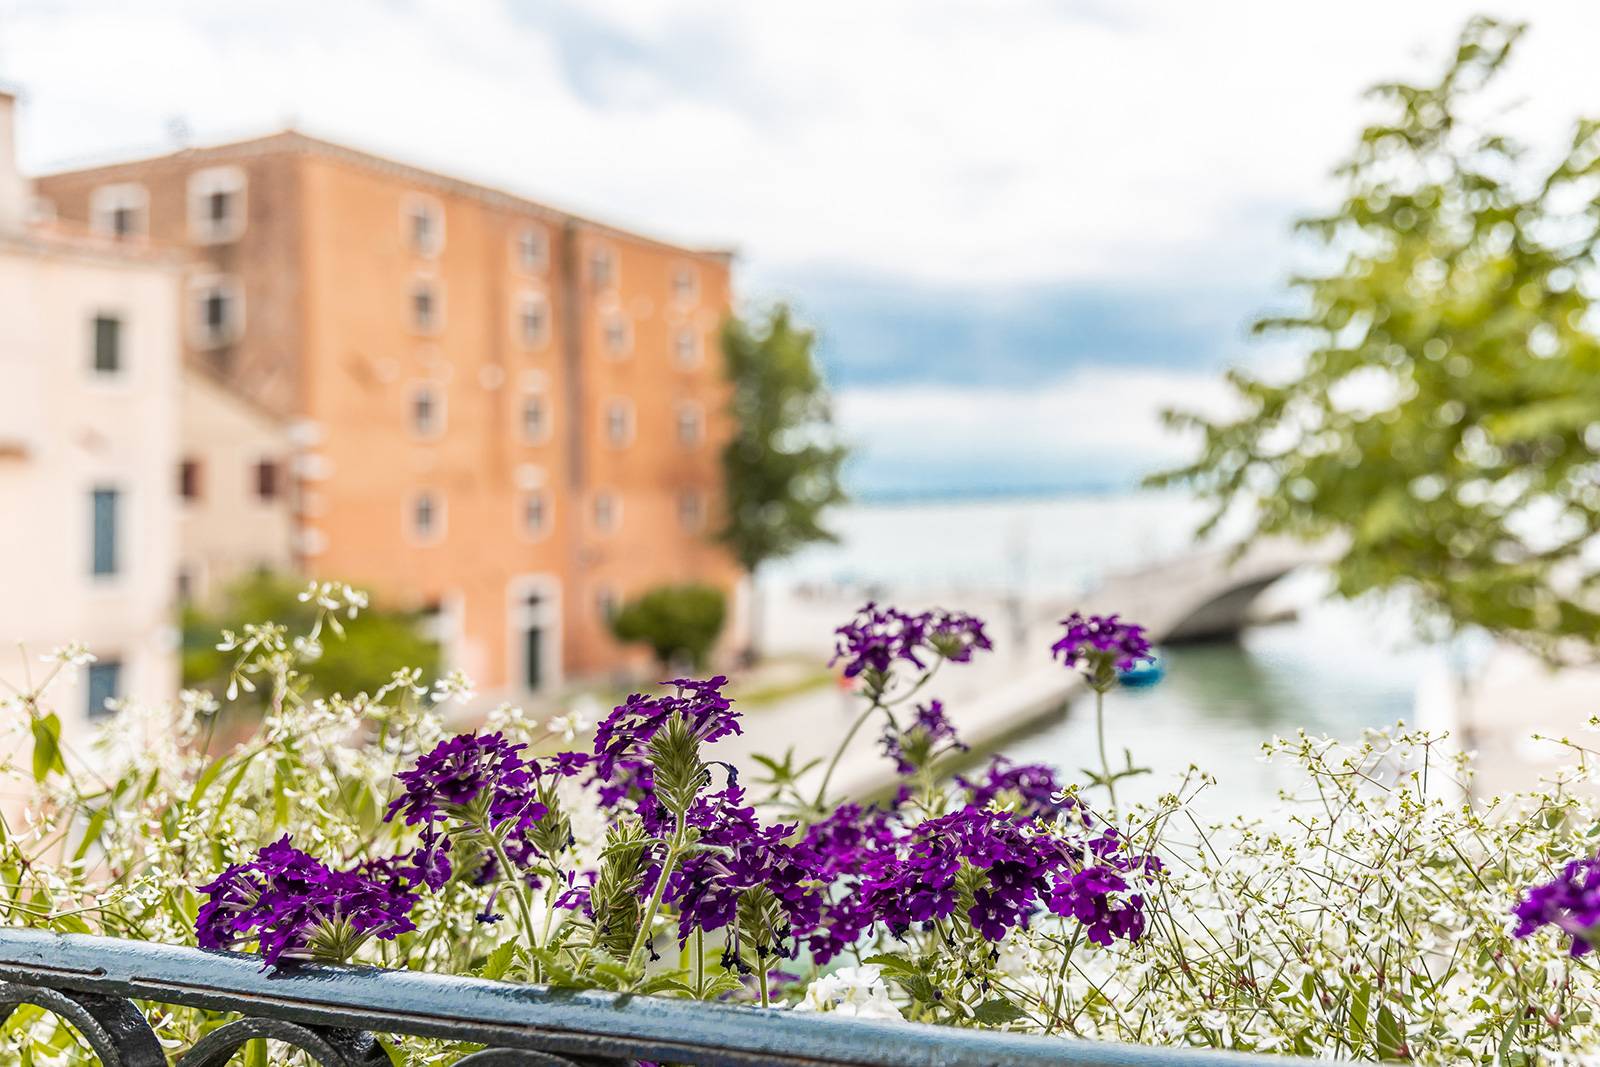 enjoy your holiday in Venice at the Alcova apartment!